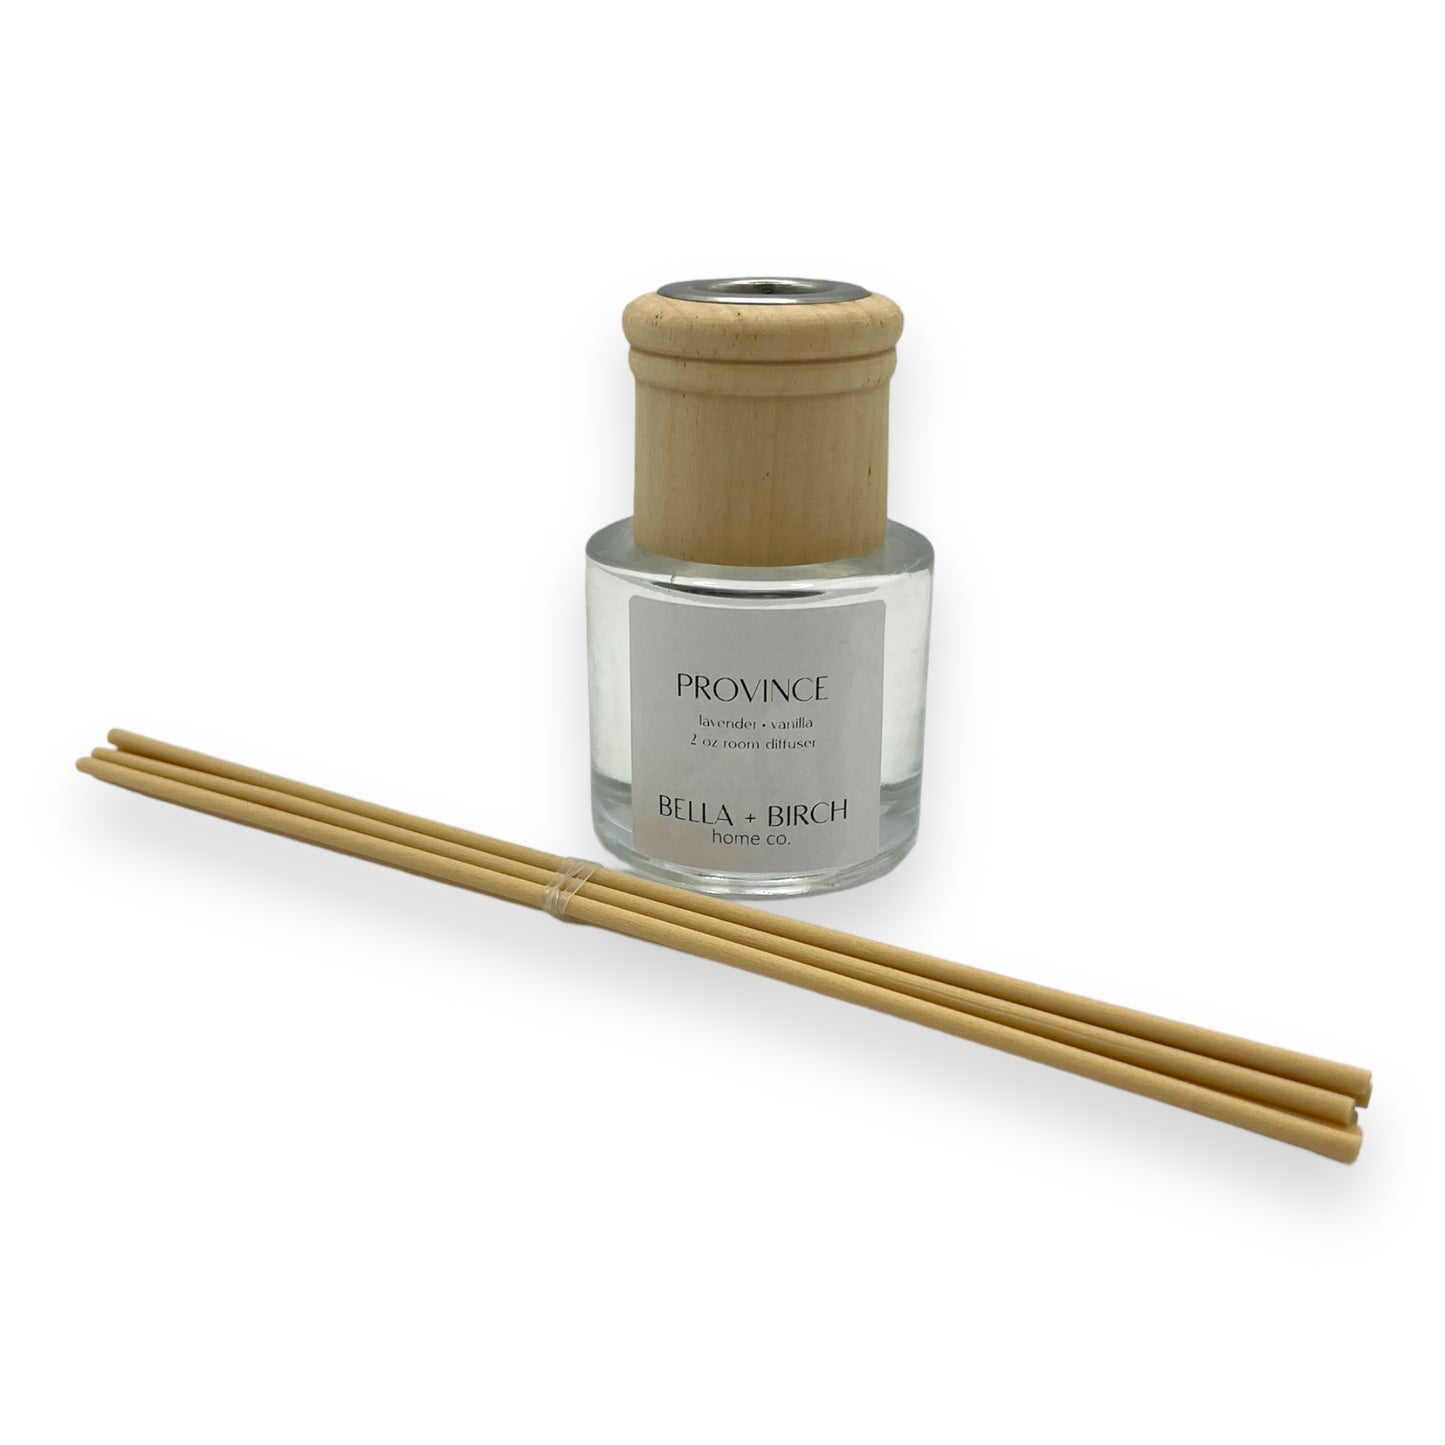 Province Room Diffuser